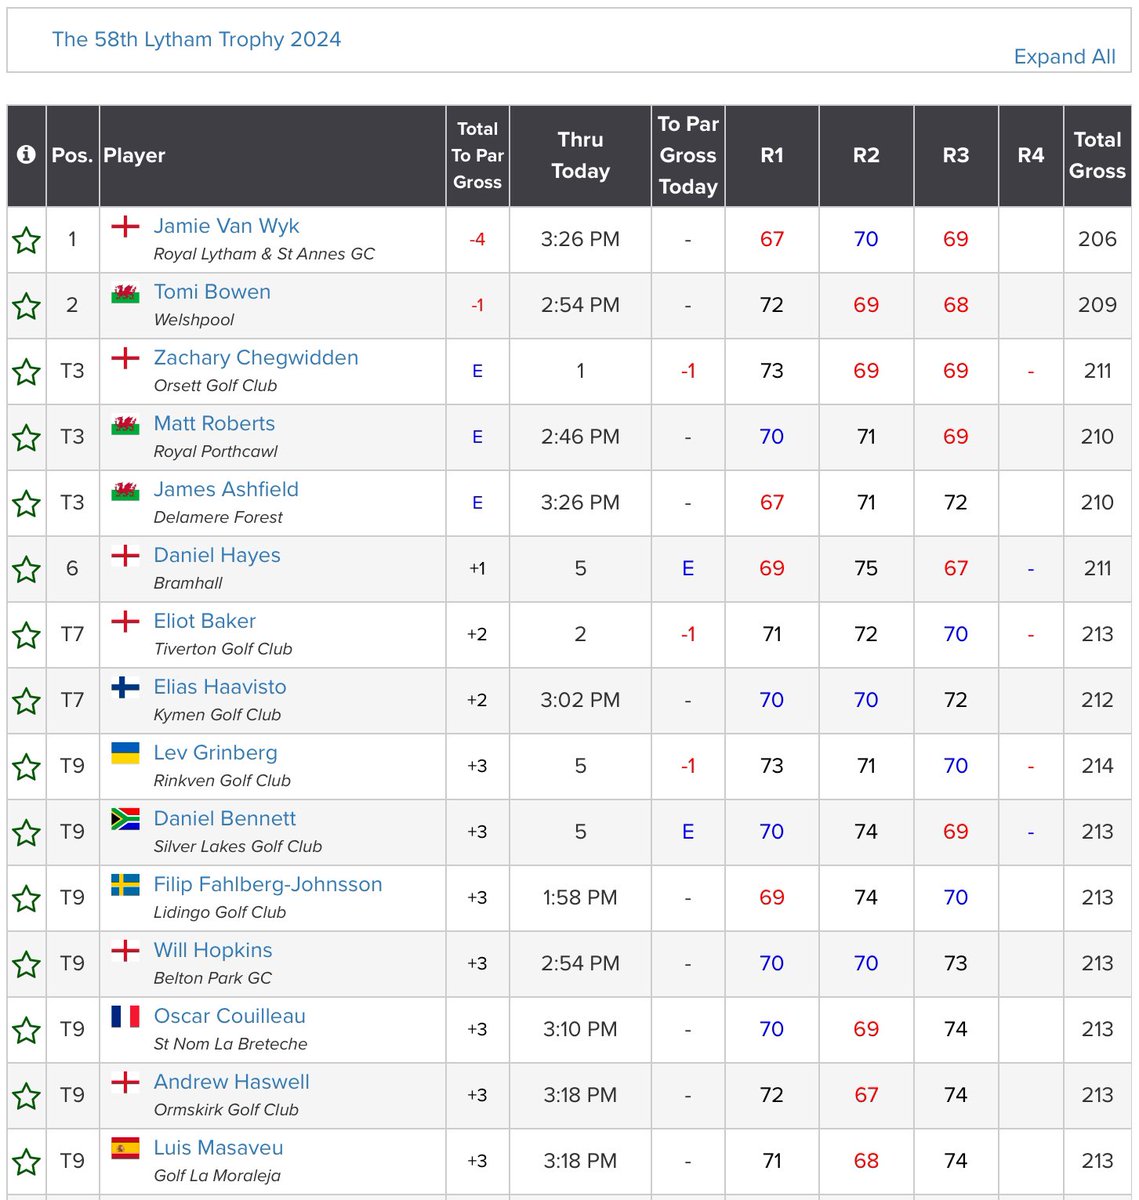 Home player @Jamie_VWyk (-4) has extended his lead to 3-shots after Rd 3 of the Lytham Trophy. @BowenTomi (-1) is 2nd, @Matt_Roberts999 & James Ashfield (Ev) are T3 and @Zacchegwidden & @danhayesgolf (+1) T5 with 18 holes to play @RoyalLythamGolf. Scores: tinyurl.com/2ux7t2e9